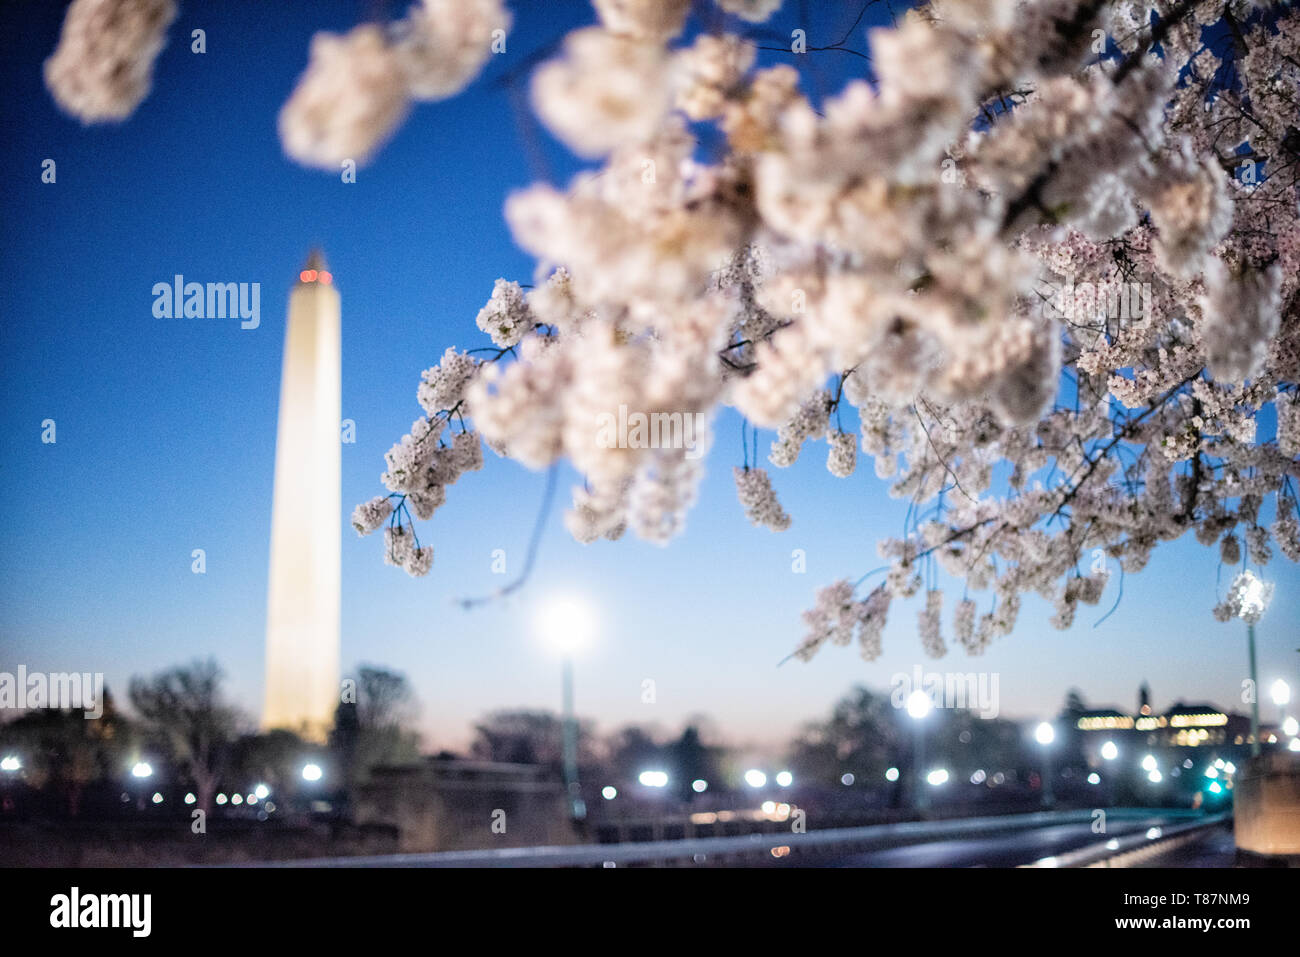 WASHINGTON, DC - The Washington Monument and Washington DC's famous cherry blossoms. The annual flowering of thousands of cherry trees around and near monuments of the Tidal Basin in Washington DC is a major tourist attraction. The bloom is only fleeting, and the precise timing changes year to year depending on the weather in the months leading up to it. Stock Photo